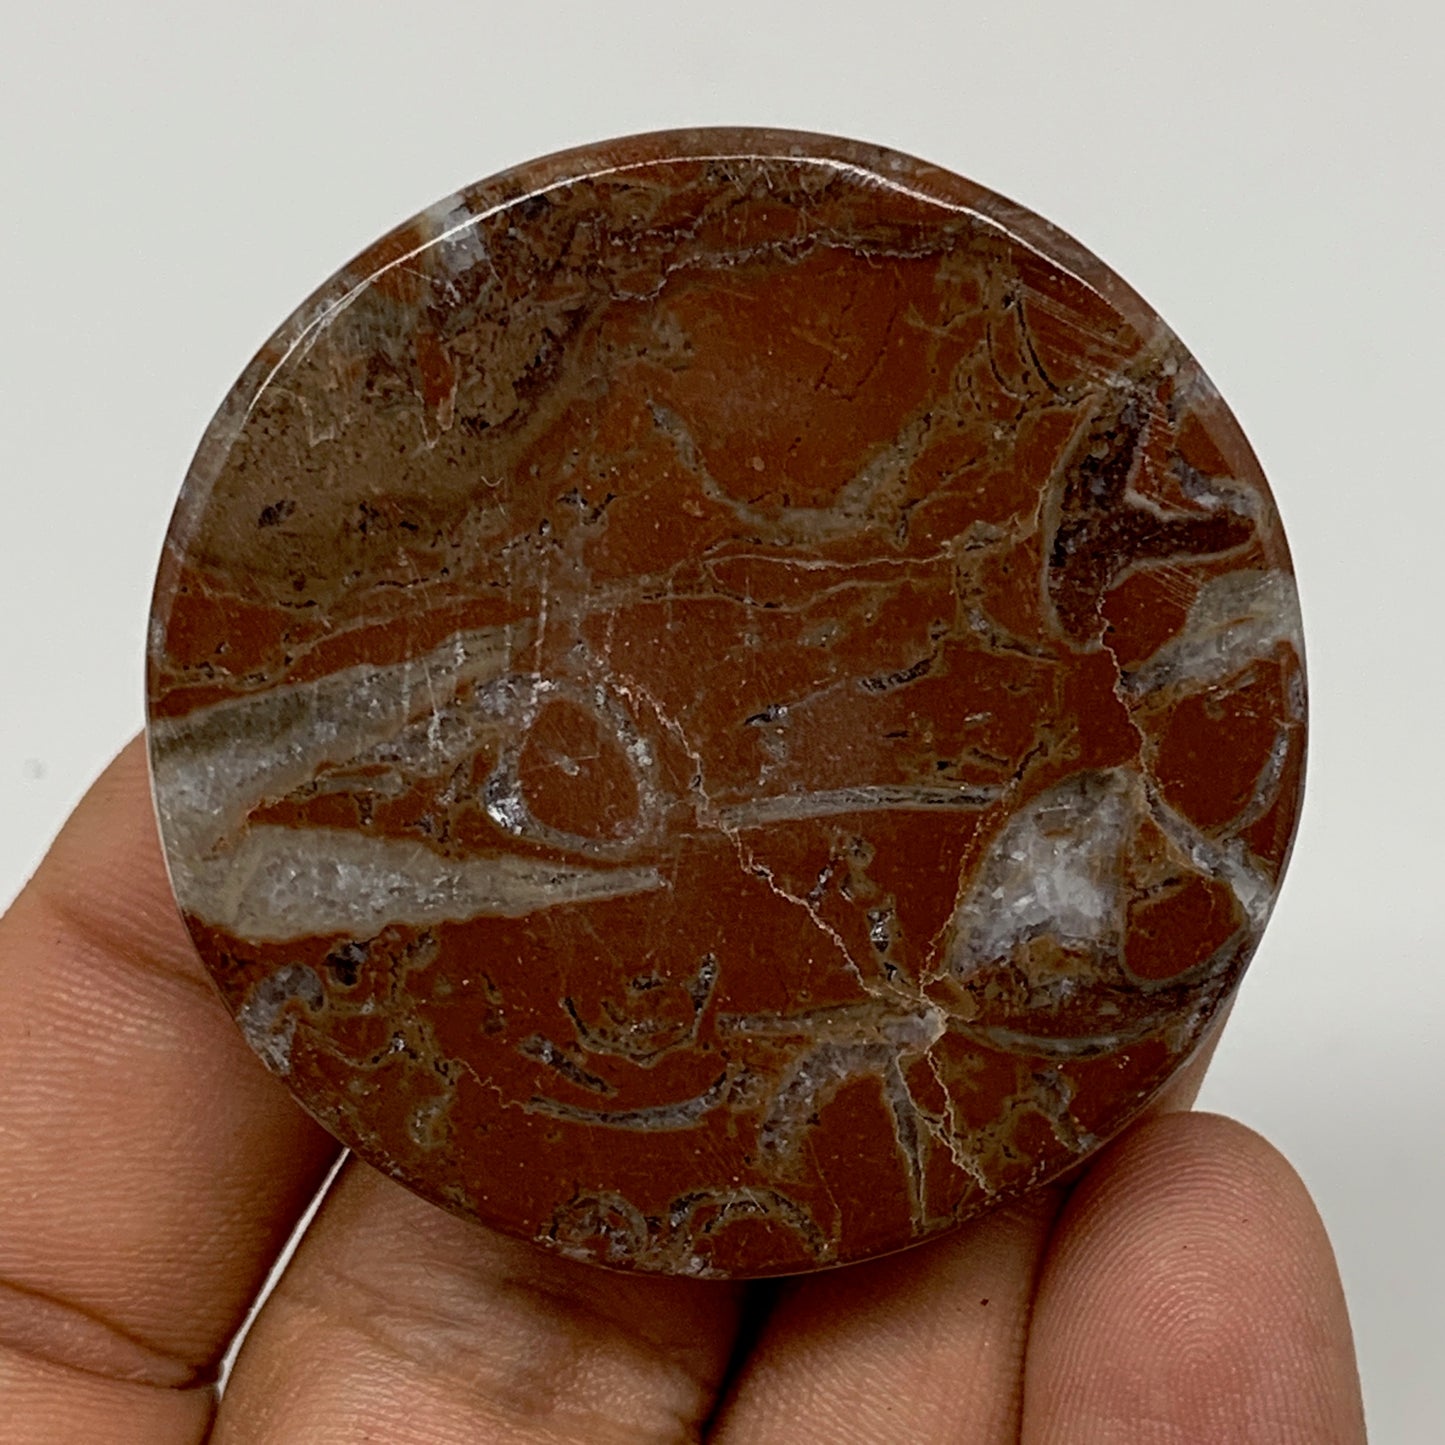 42.1g, 1.8"x0.5", Natural Untreated Red Shell Fossils Round Palms-tone, F1120